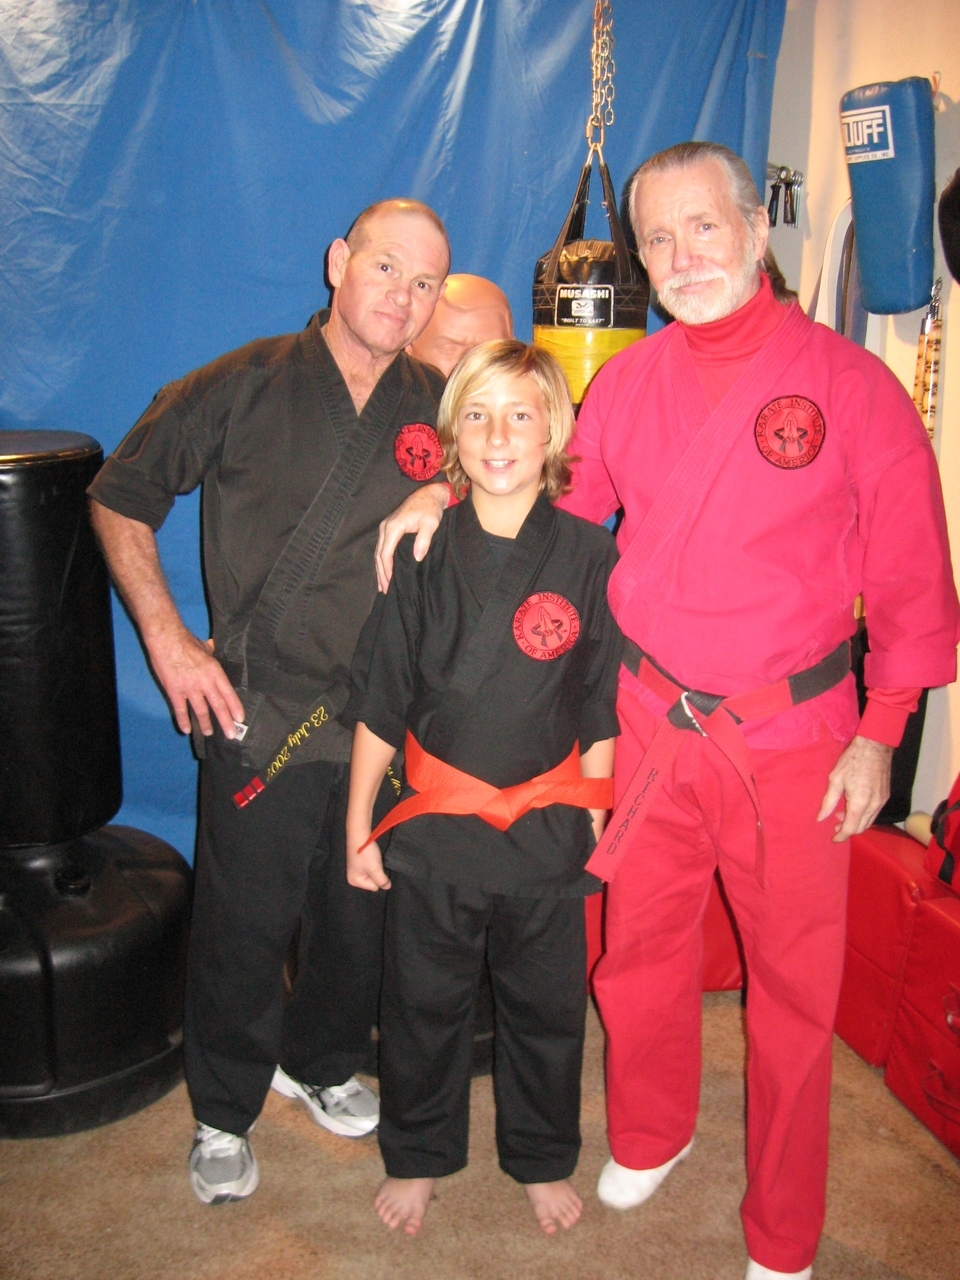 Jake &ldquo;Achilles&rdquo; Dale, flanked by Kim &ldquo;Cultivator&rdquo; Thomas (left) and Grandmaster Richard &ldquo;Whitefire&rdquo; King (right).